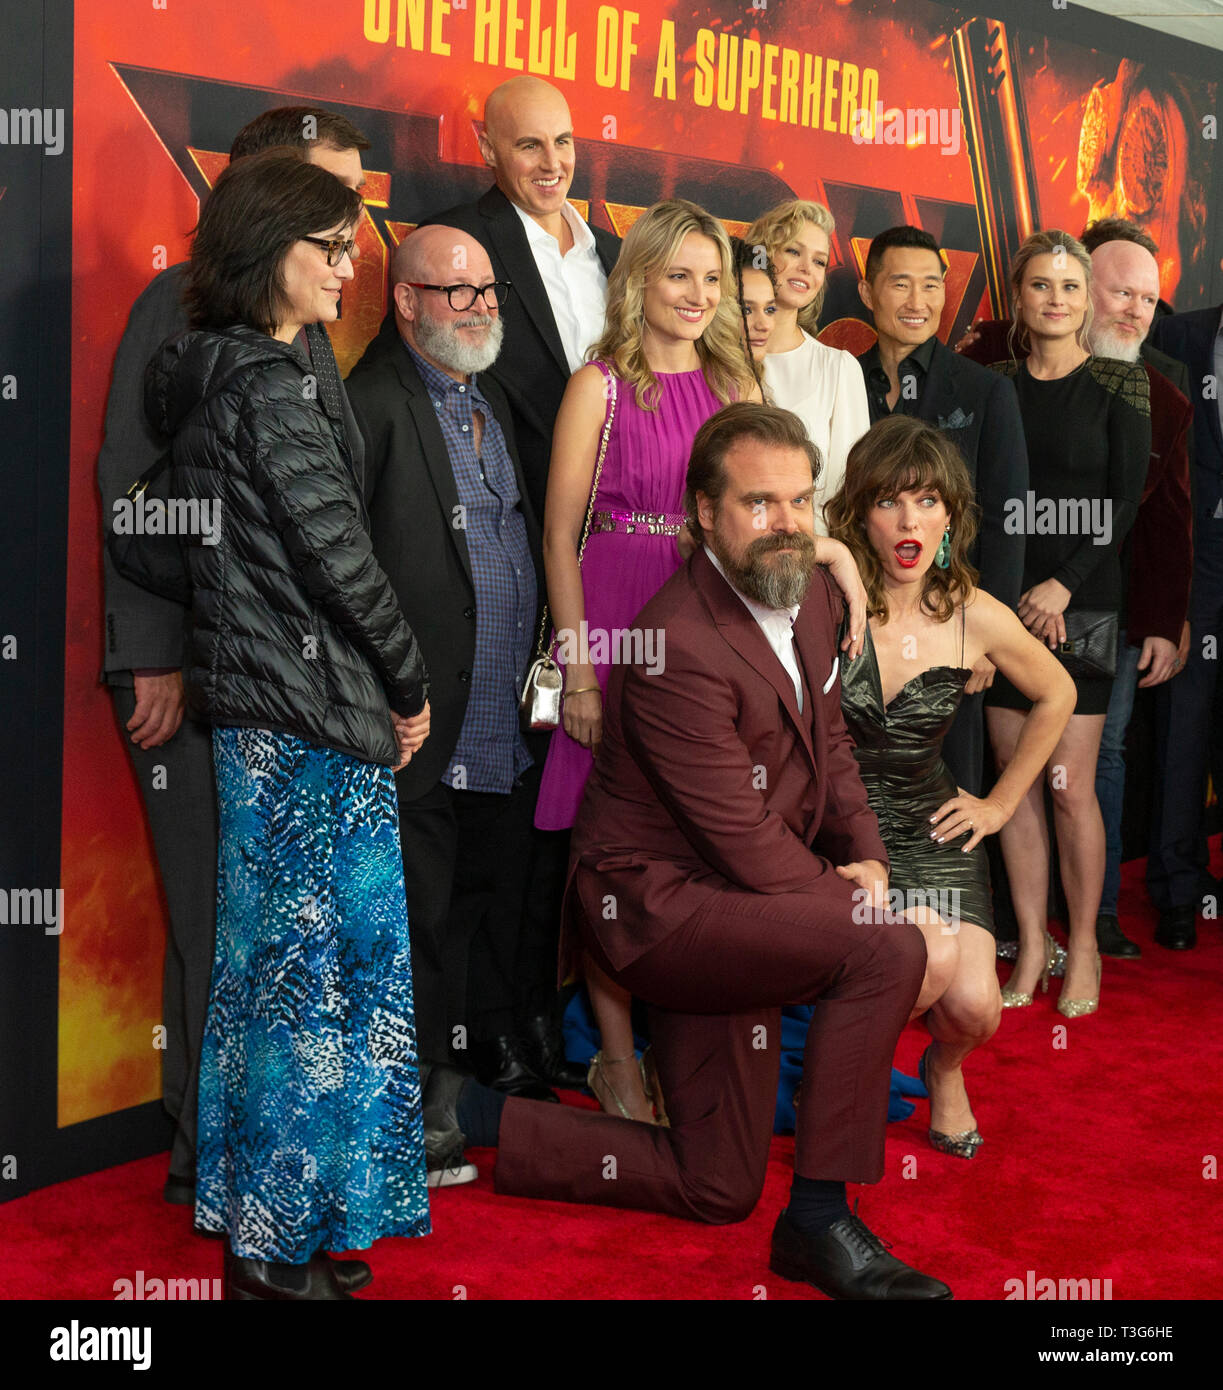 New York, NY - April 8, 2019: Cast and crew attend the Hellboy New York Screening at AMC Lincoln Square Theater Stock Photo